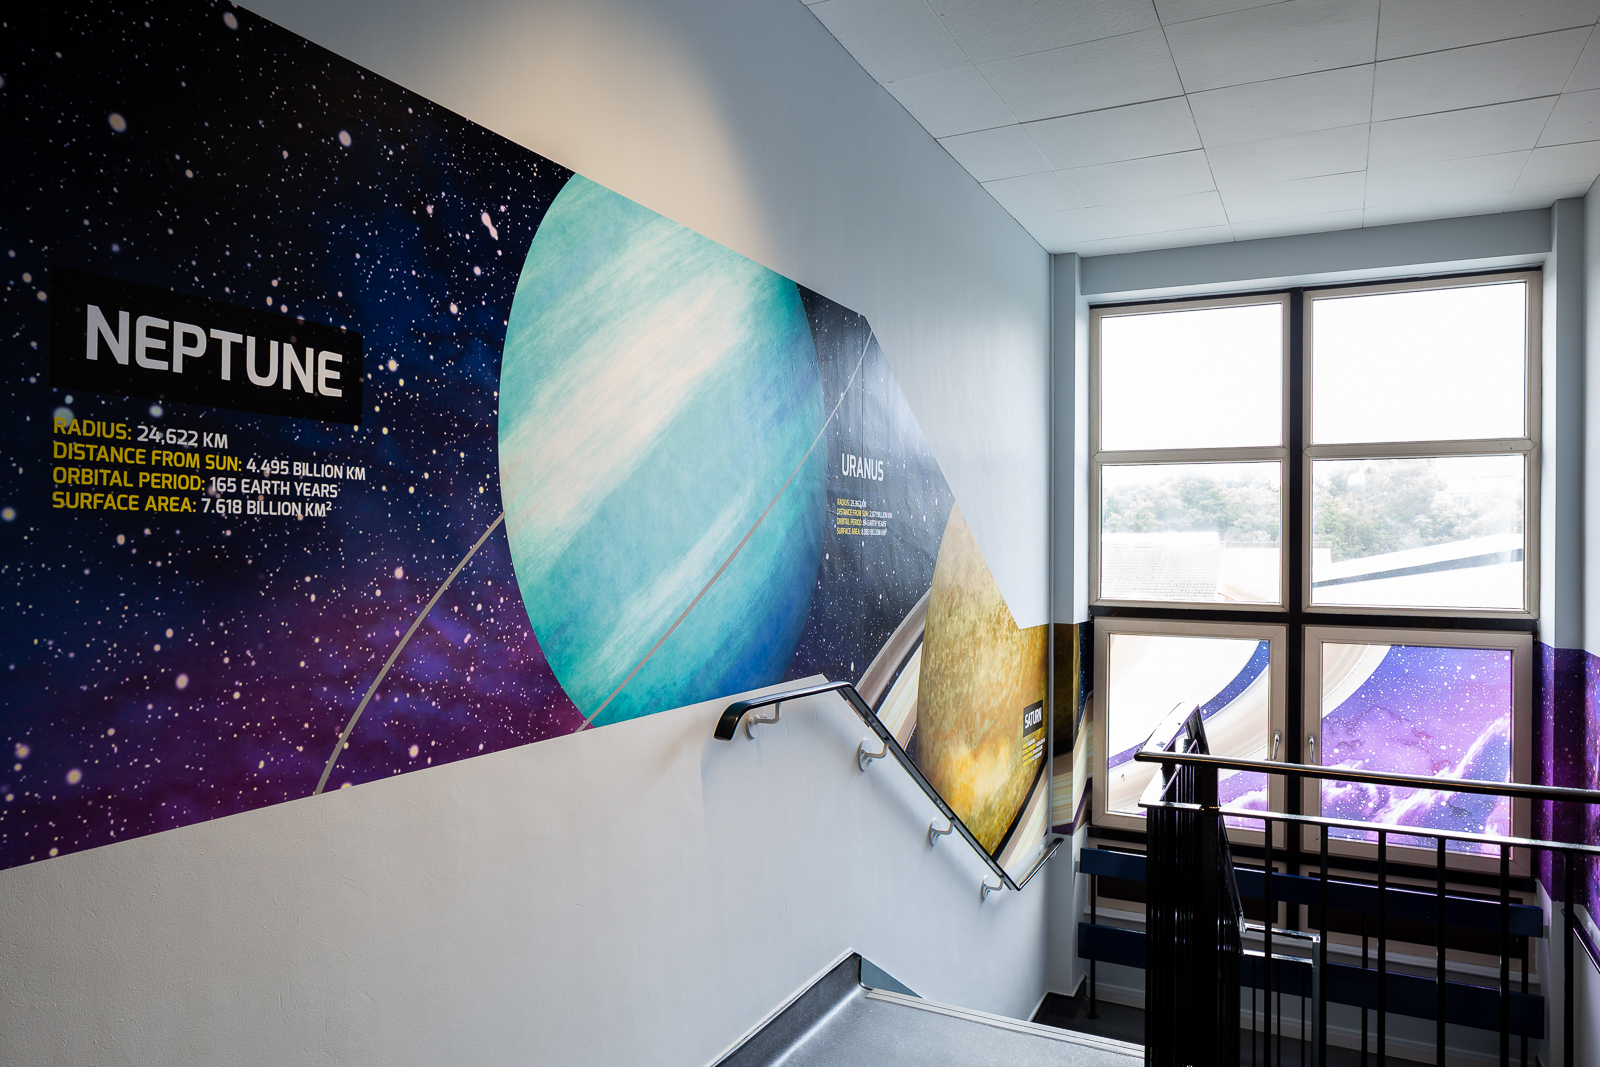 image from completed school stairway wall art installation